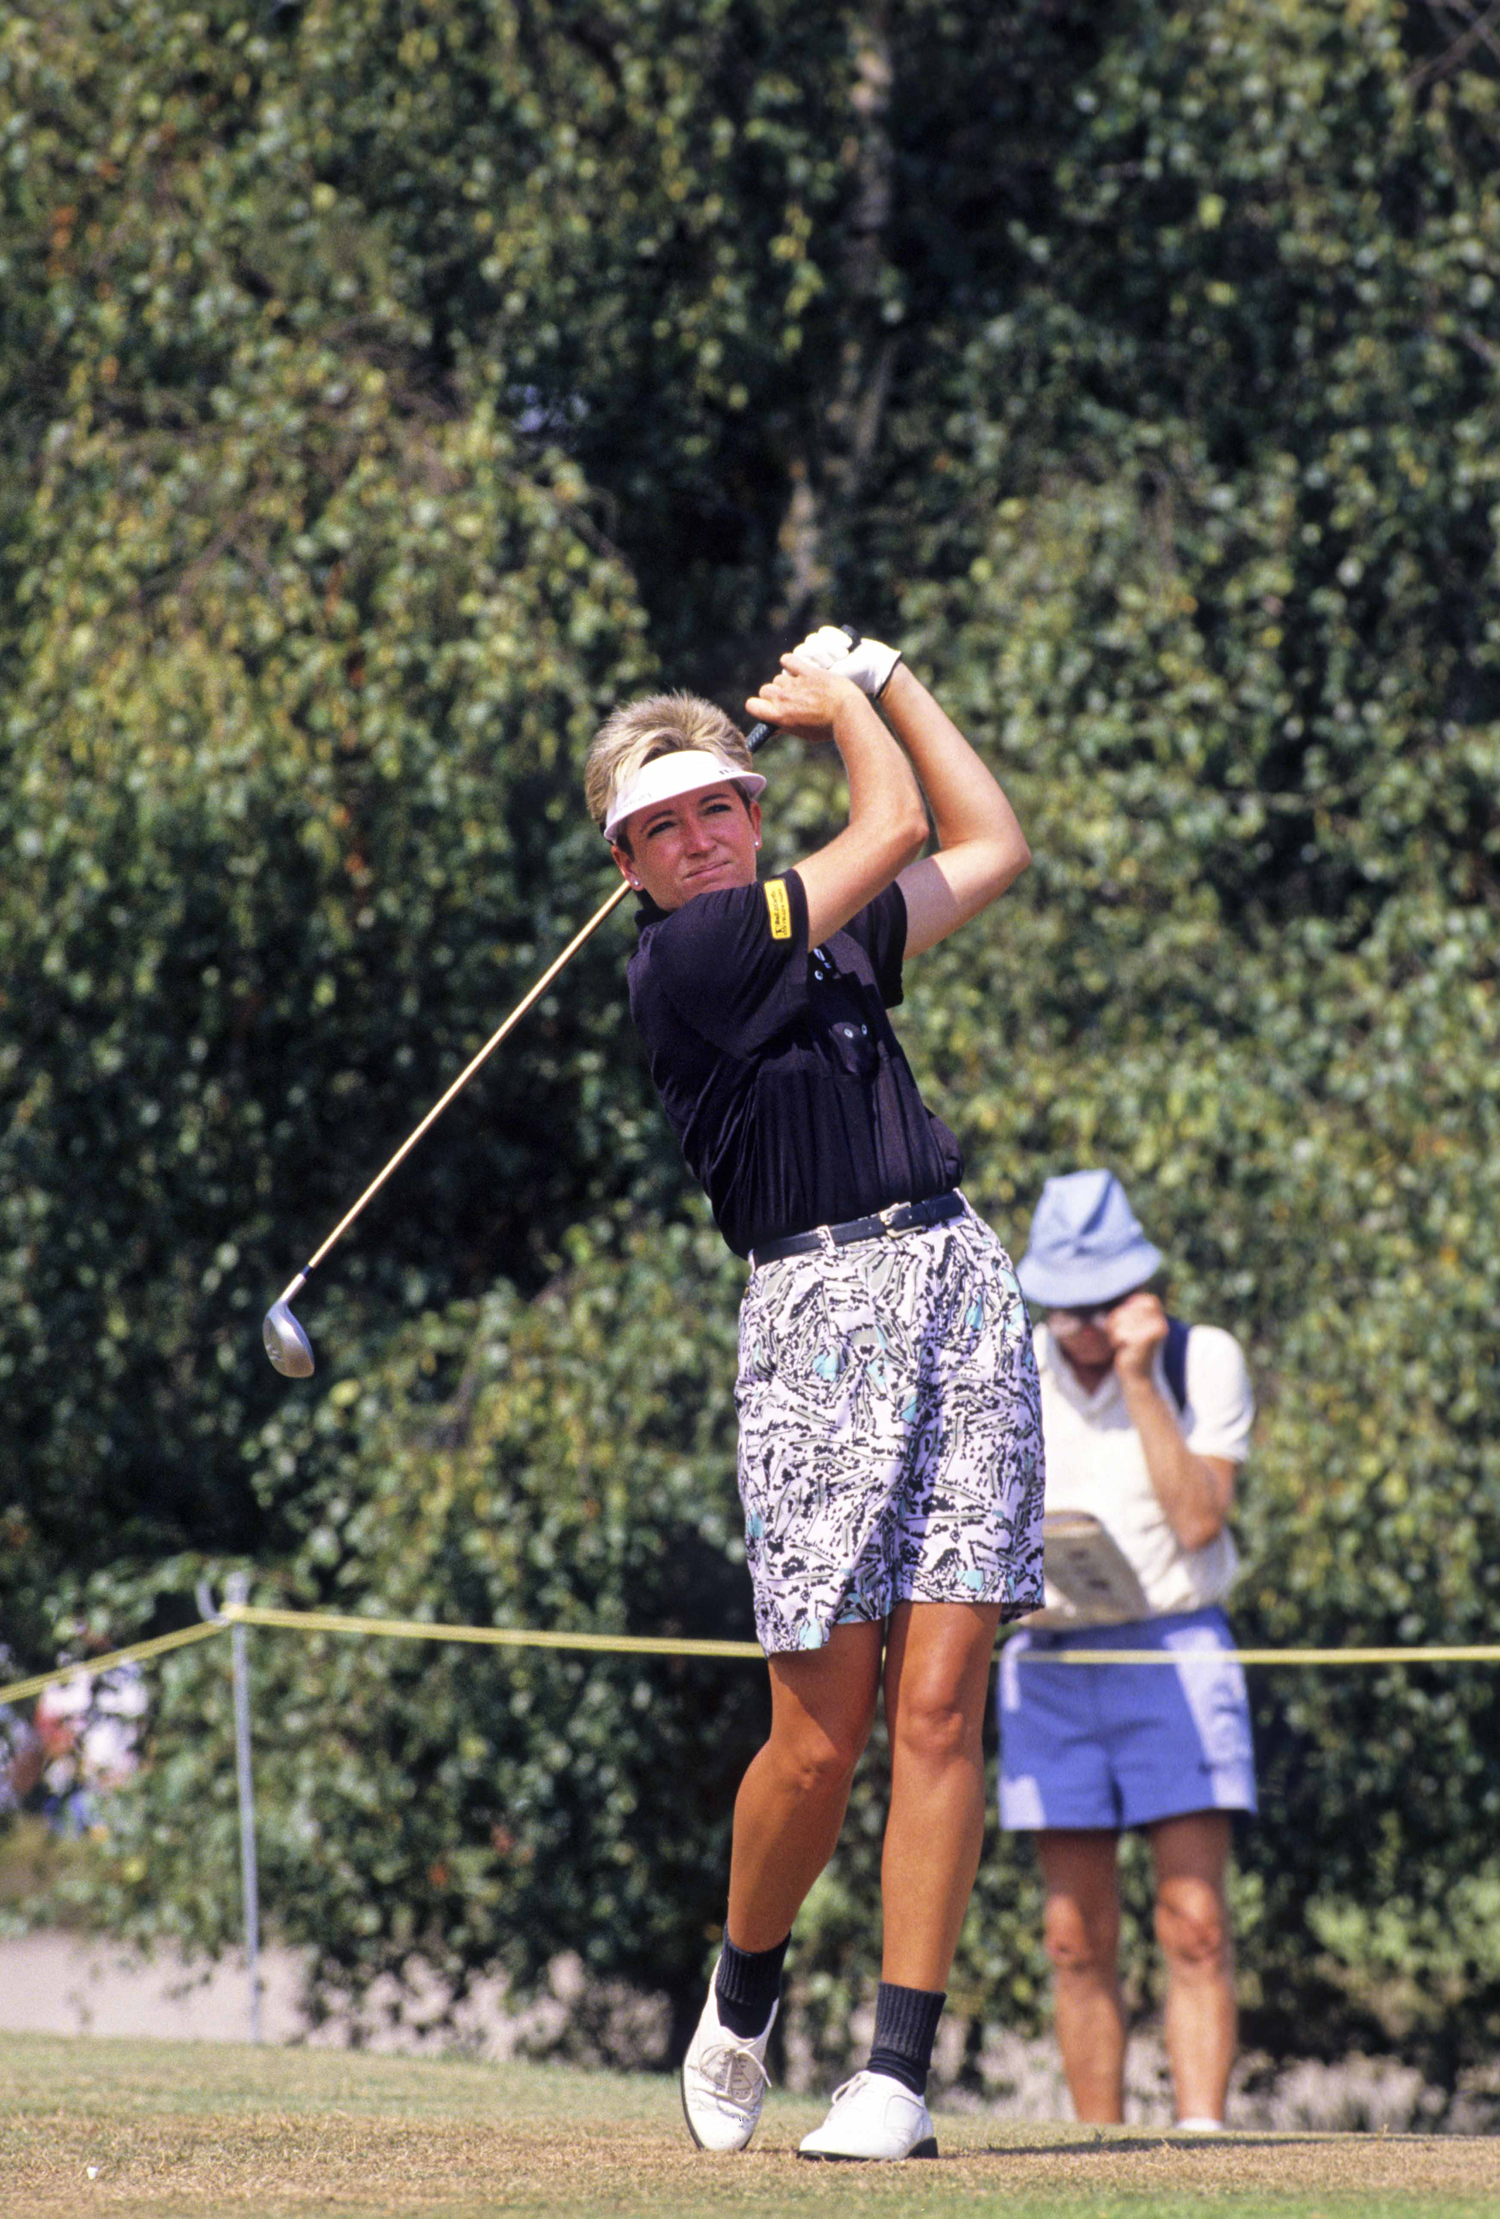 Patti Rizzo on the tee at the 1989 Women's British Open Championship at Ferndown. 